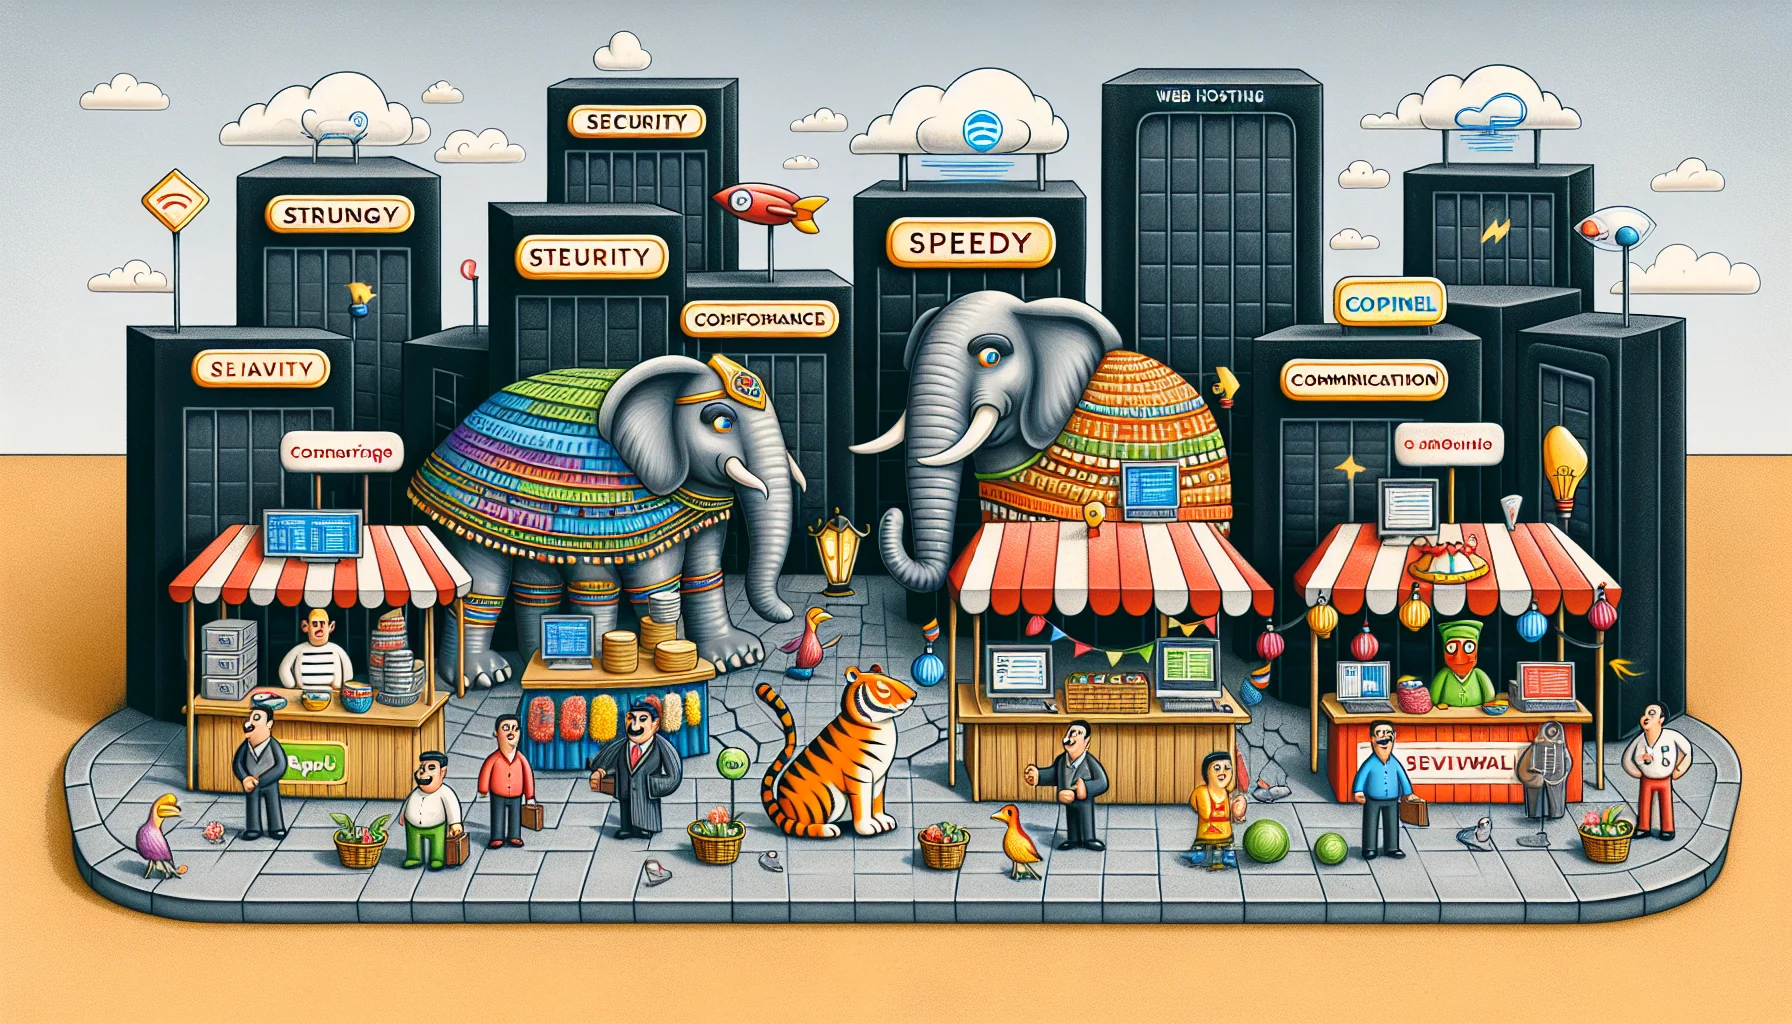 Create a humorous and engaging scene related to web hosting, possibly a bustling marketplace with various stalls each representing different cPanel alternatives. The stall holders could be lively animals such as an elephant, a tiger, and a parrot, admired for their strength, speed, and communication skills respectively, promoting their services energetically. Each stall could have symbols depicting the software's features, for instance, a sturdy shield for security, a speedy rocket for performance, and a genie lamp for easy customization. Contextual elements like internet clouds and server-shaped buildings could embellish the background.